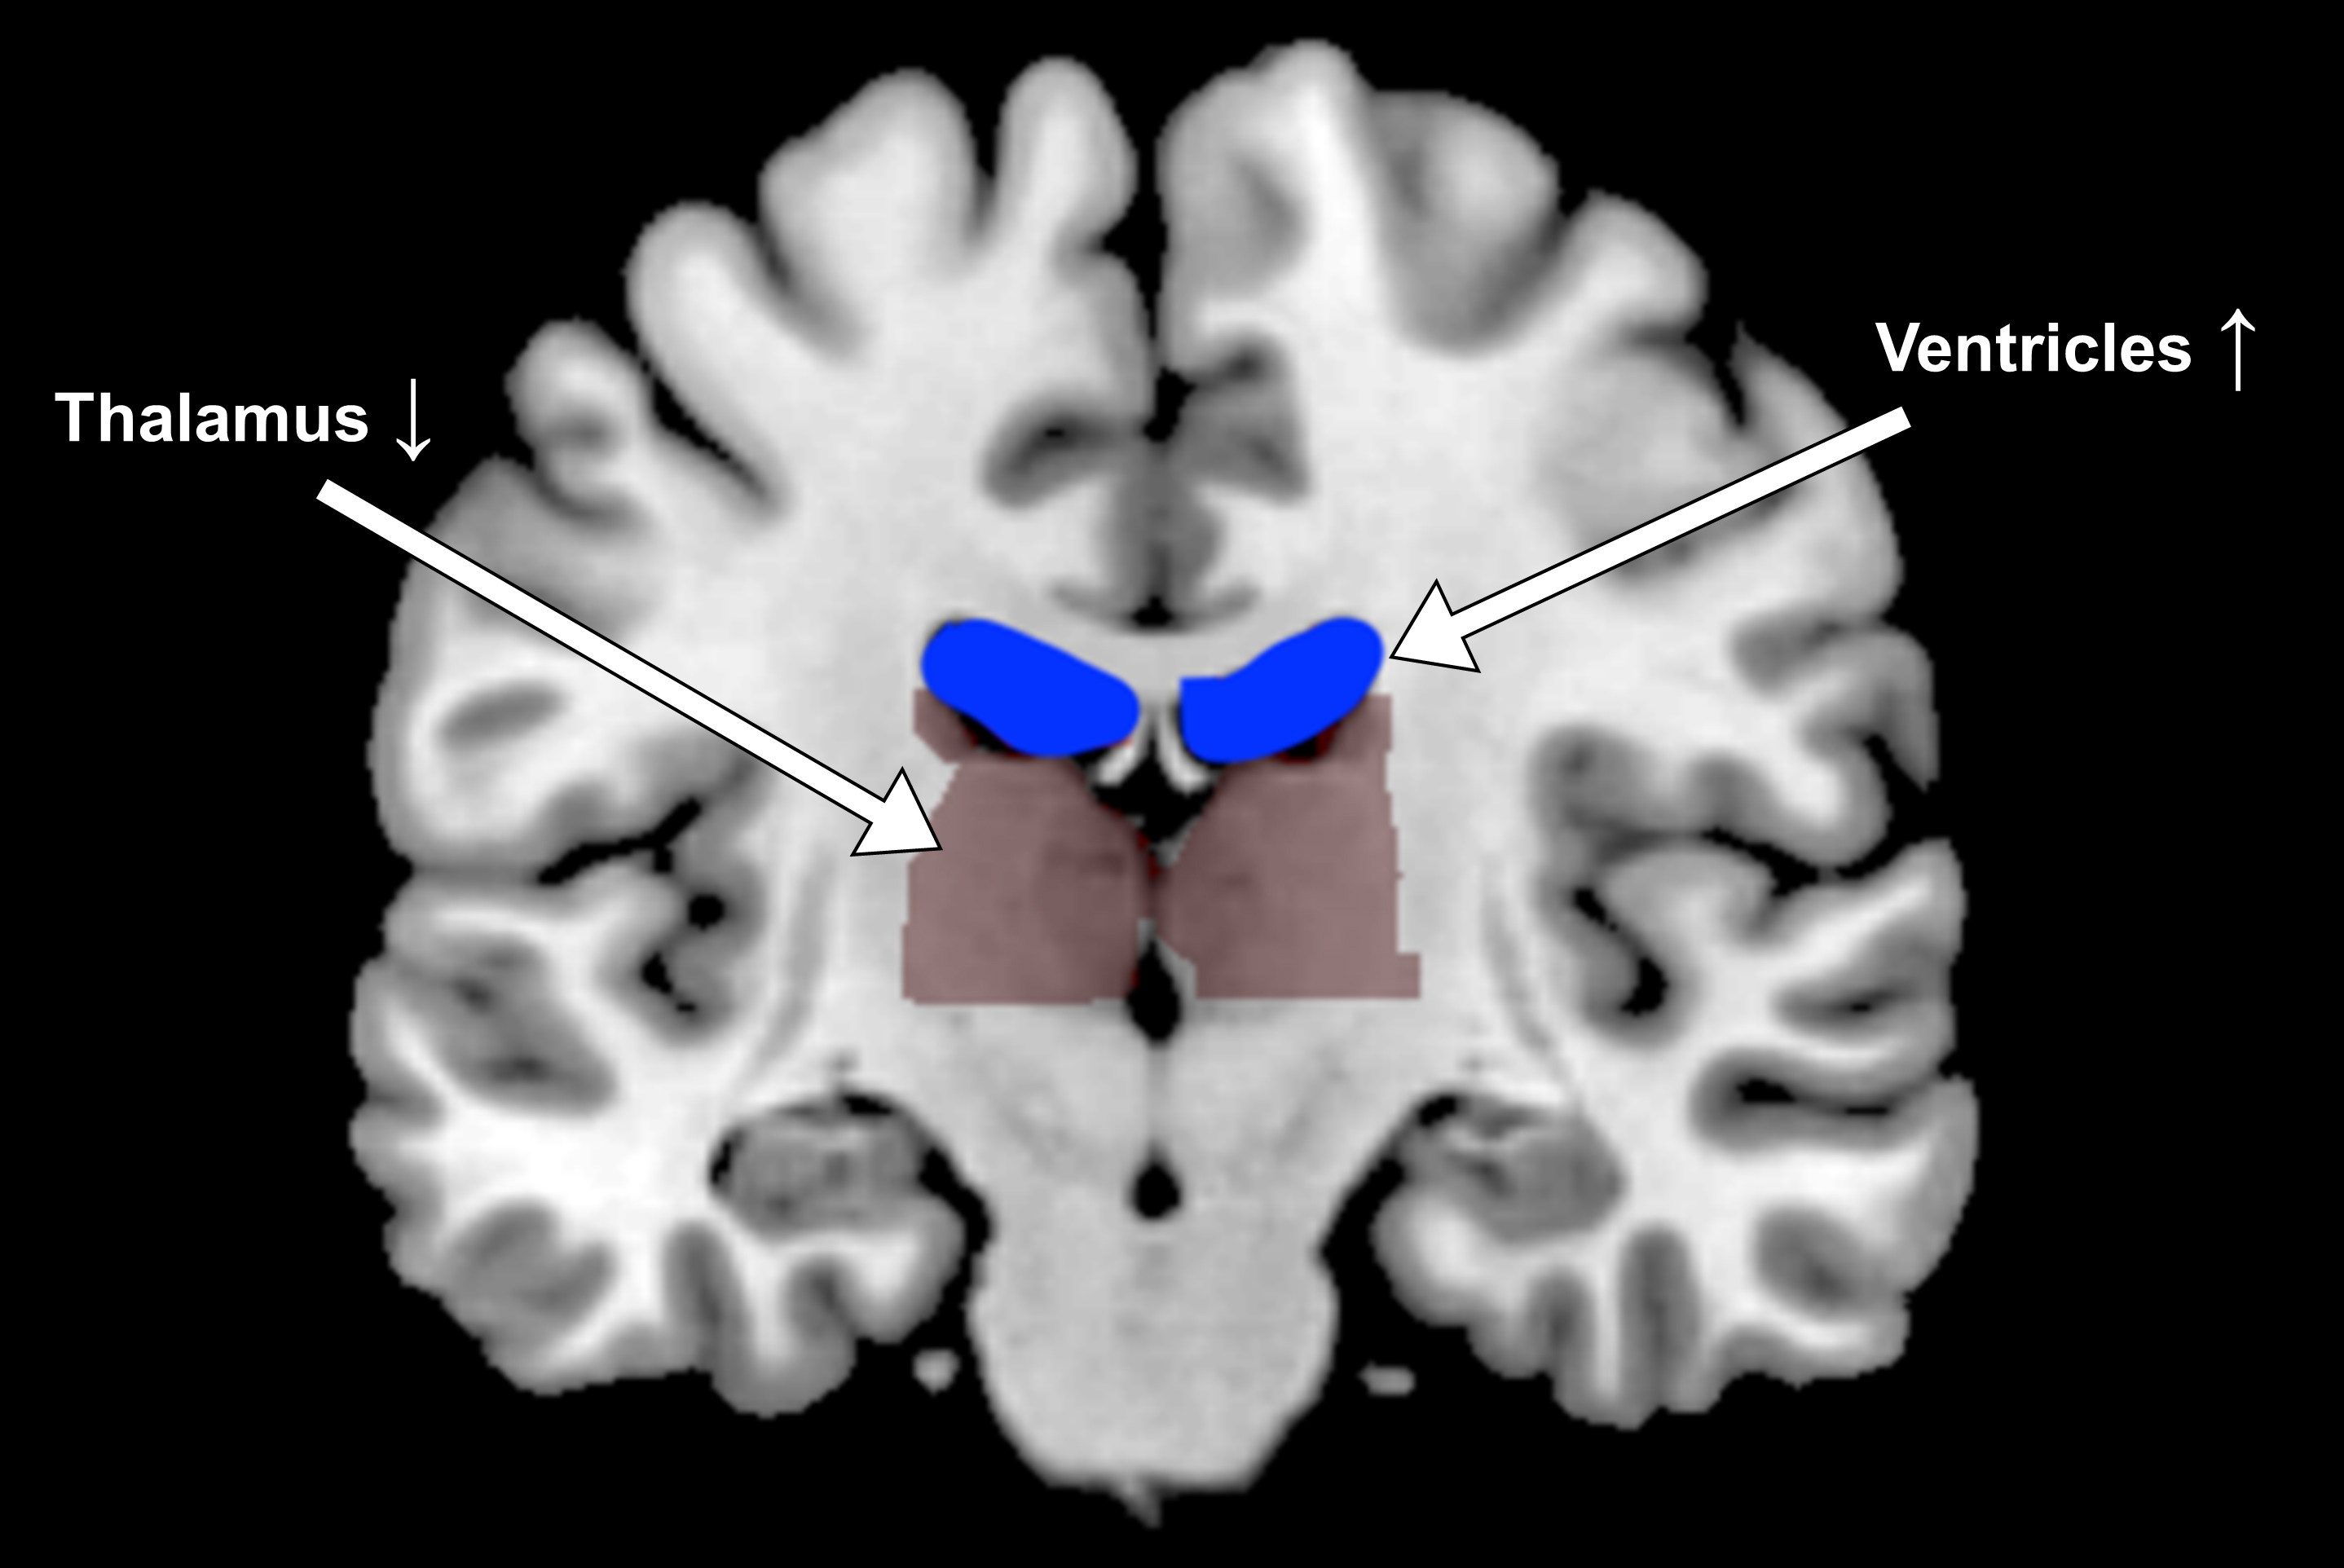 fMRI brain ventricles expand in dehydration